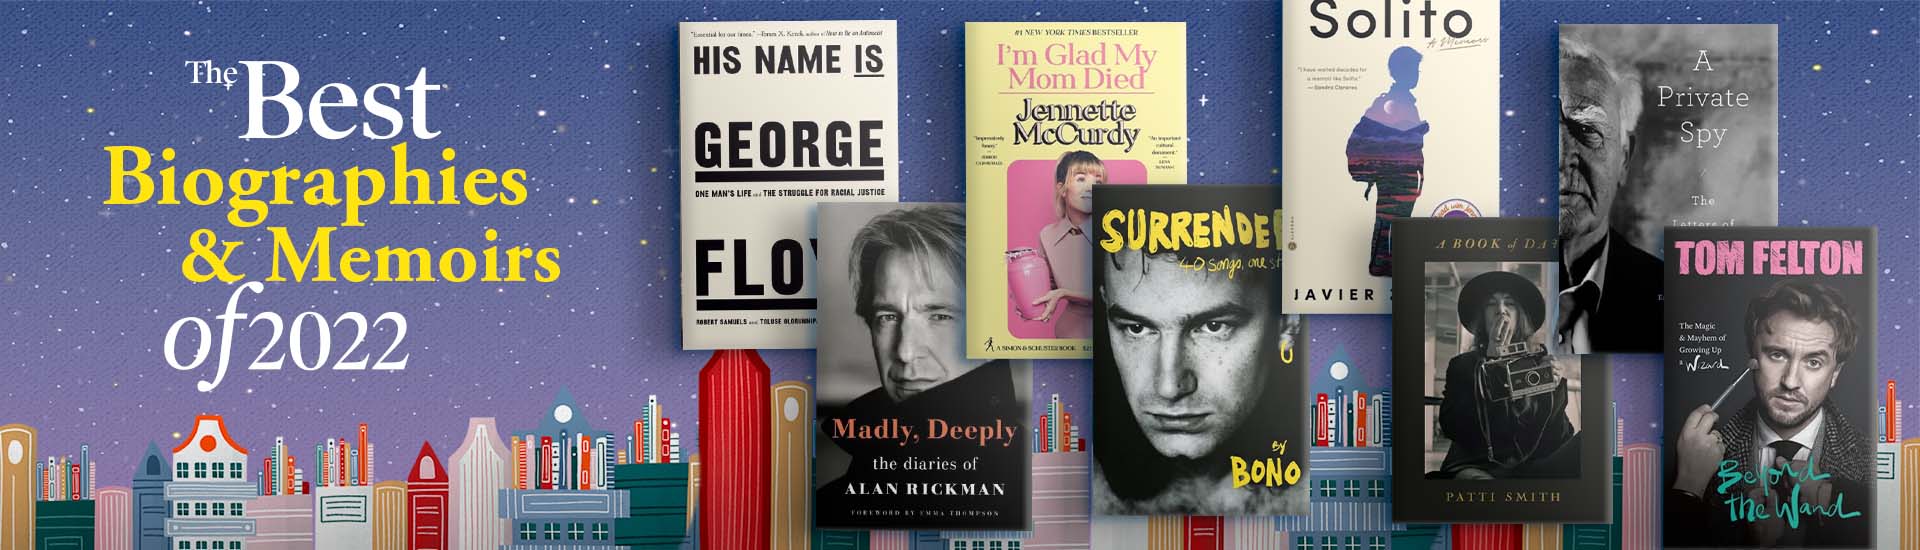 best biography books of 2022